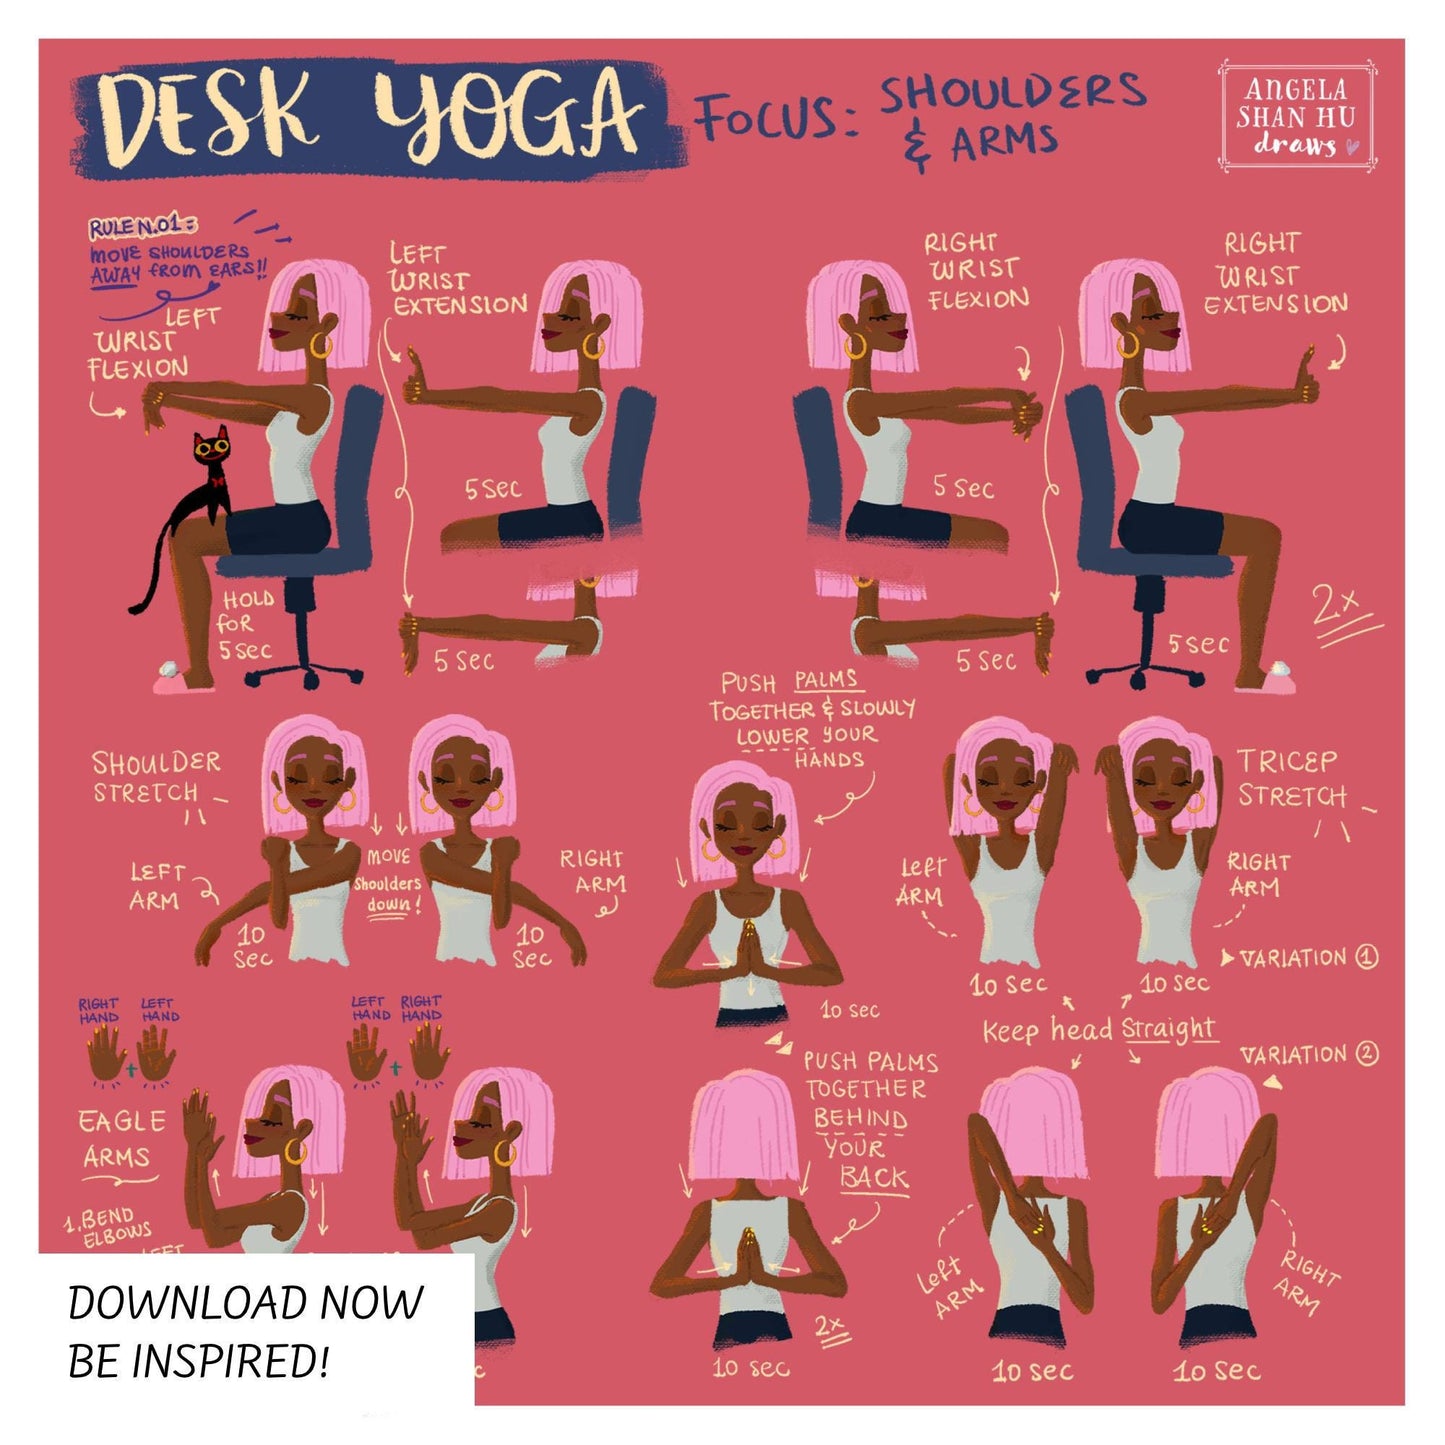 Desk Yoga - Shoulders and Arms | Yoga At Your Desk | Office Yoga | Yoga Art Print | Fitness Art | 8x8 in, 8x10 in, 16x16 in